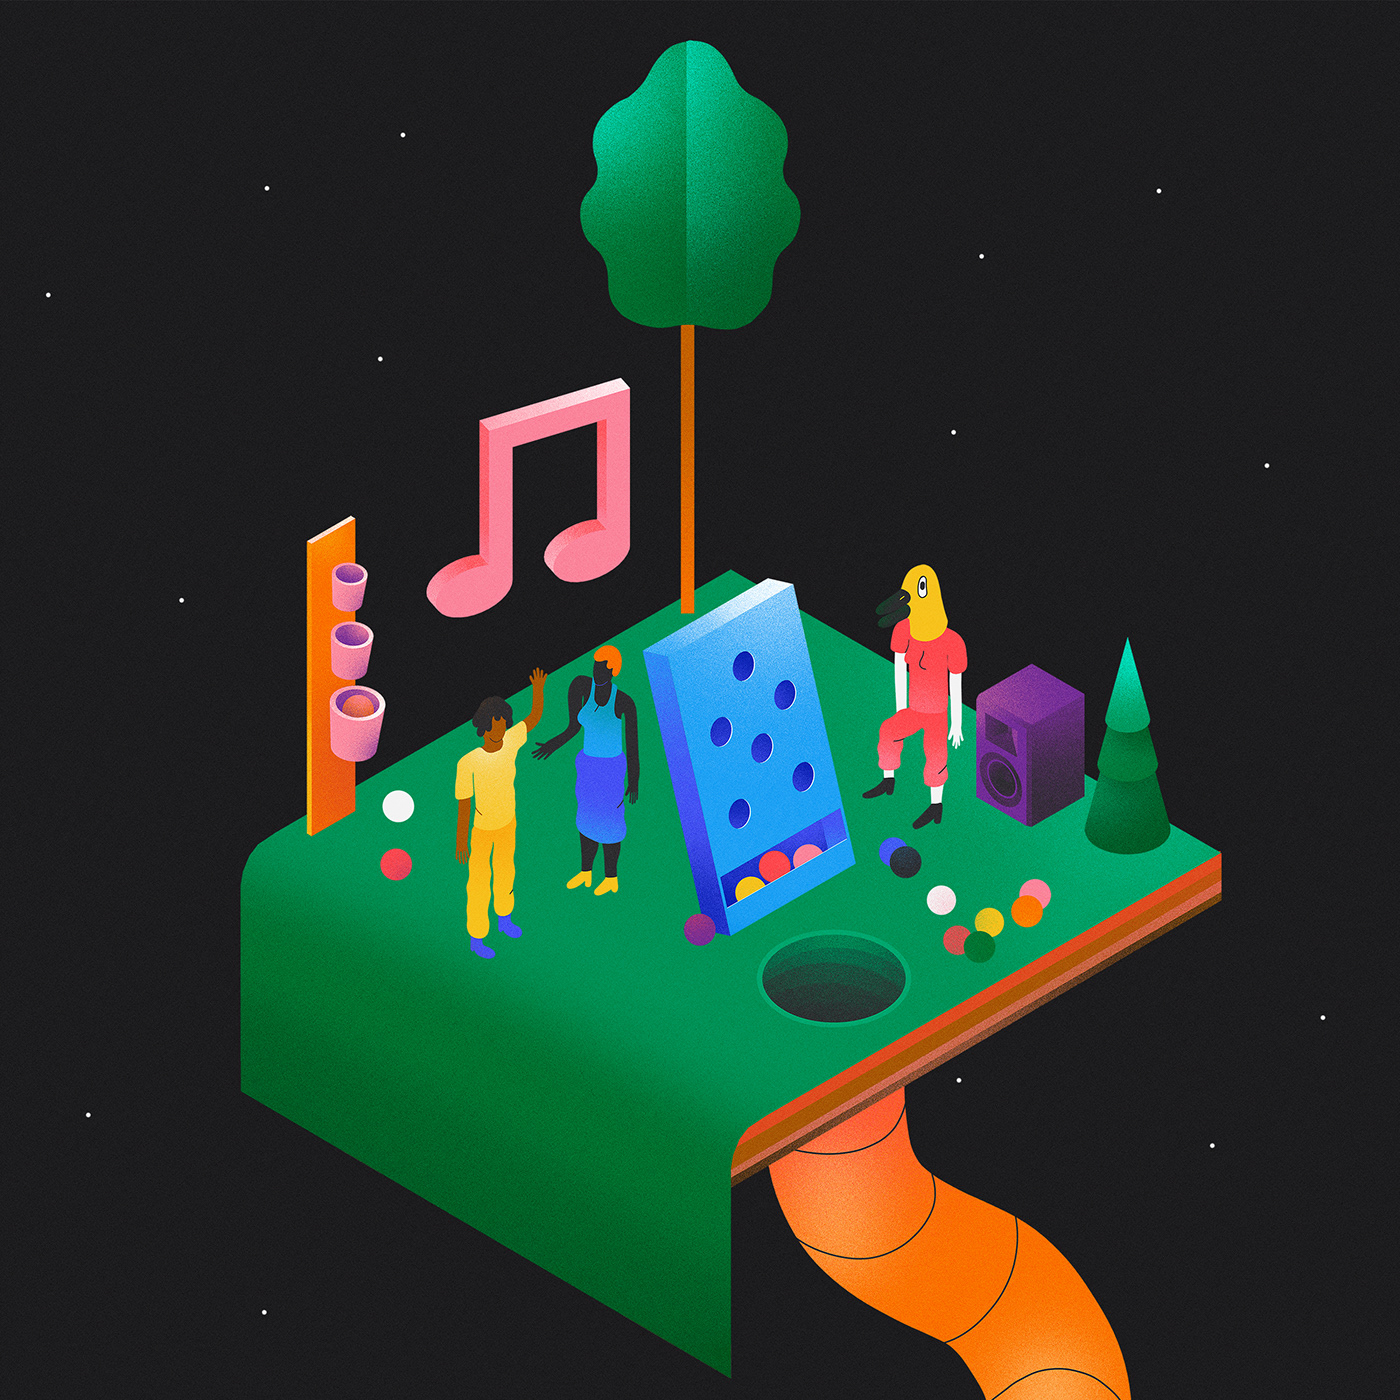 BBQ Fun green ILLUSTRATION  Isometric Nature party summer